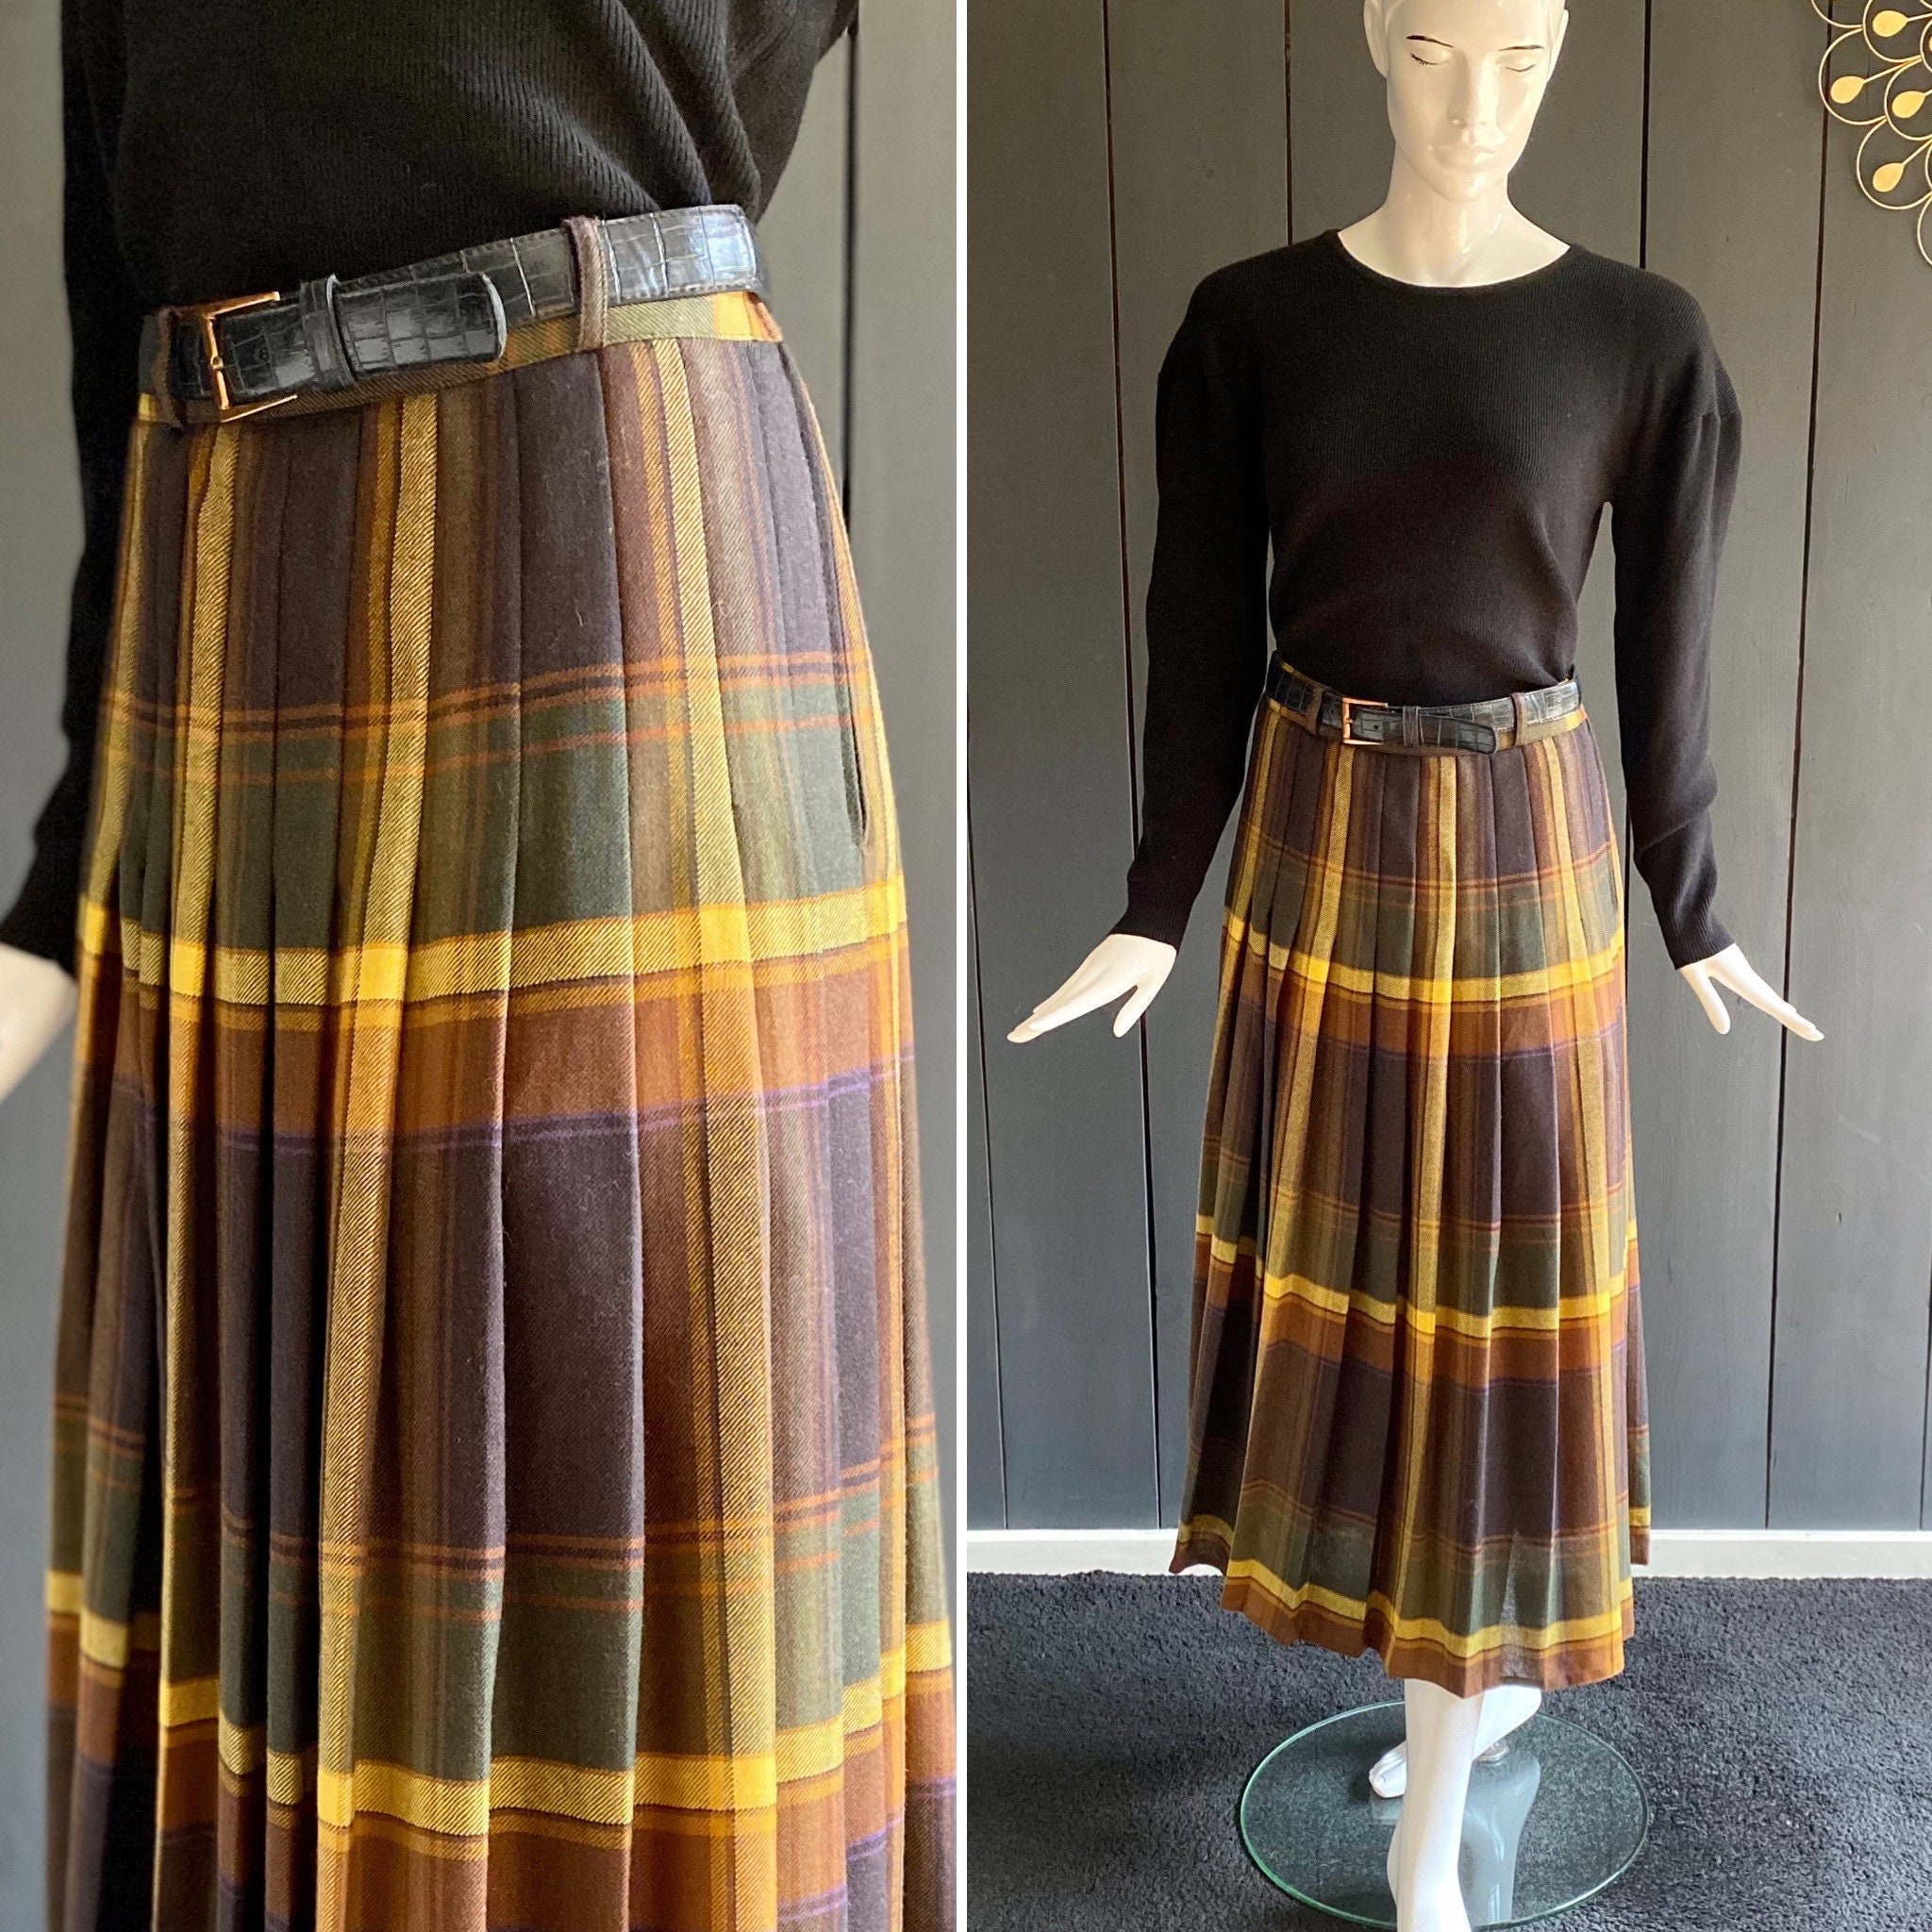 Superb Vintage 90s Gerry Weber Skirt in Long Pleated Wool, With Matching  Belt, in Yellow and Brown Tones, Size 34/36 - Etsy